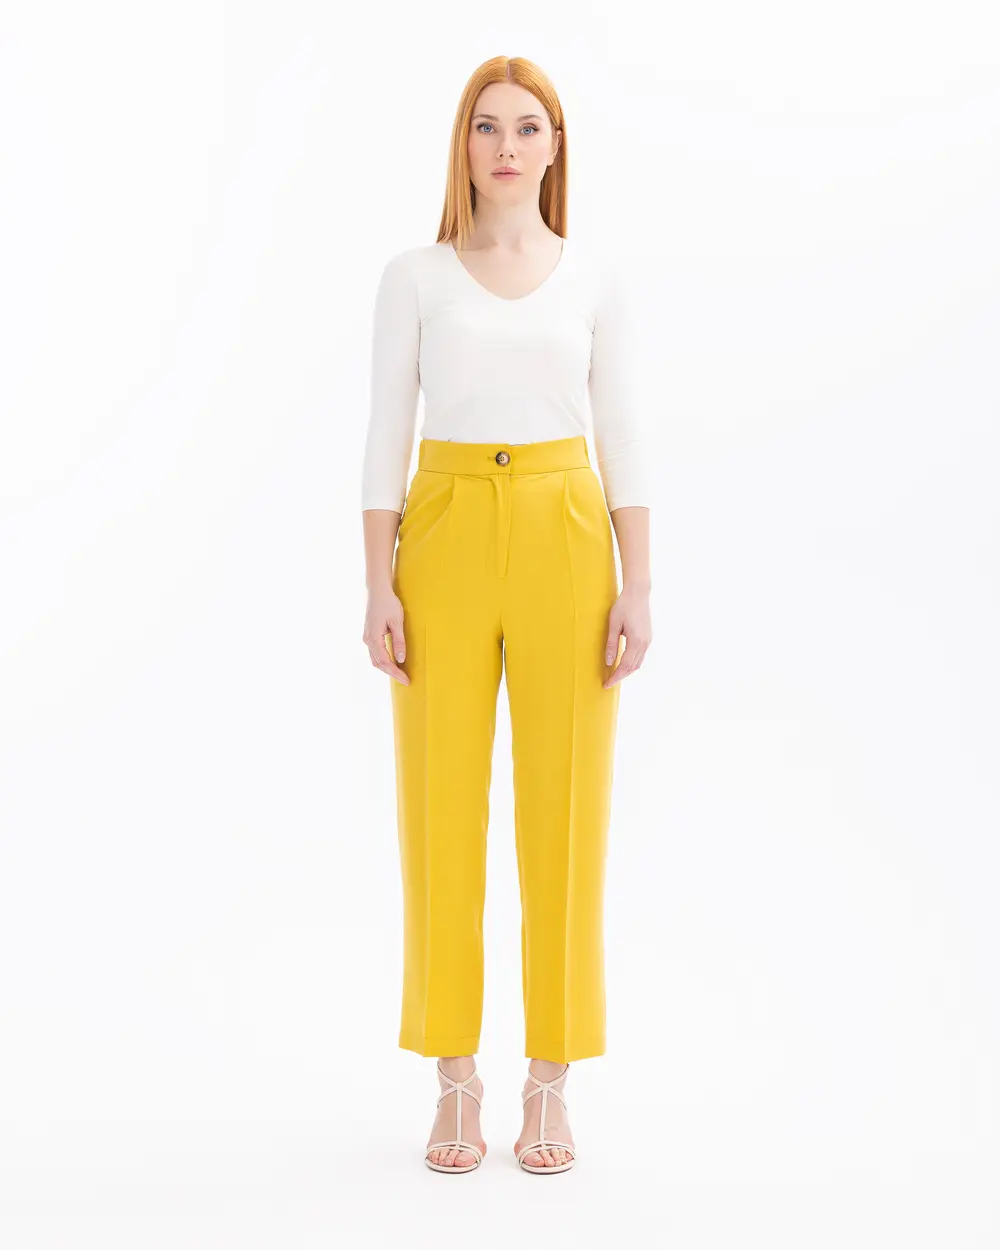 Woven Fabric Pants with Pockets